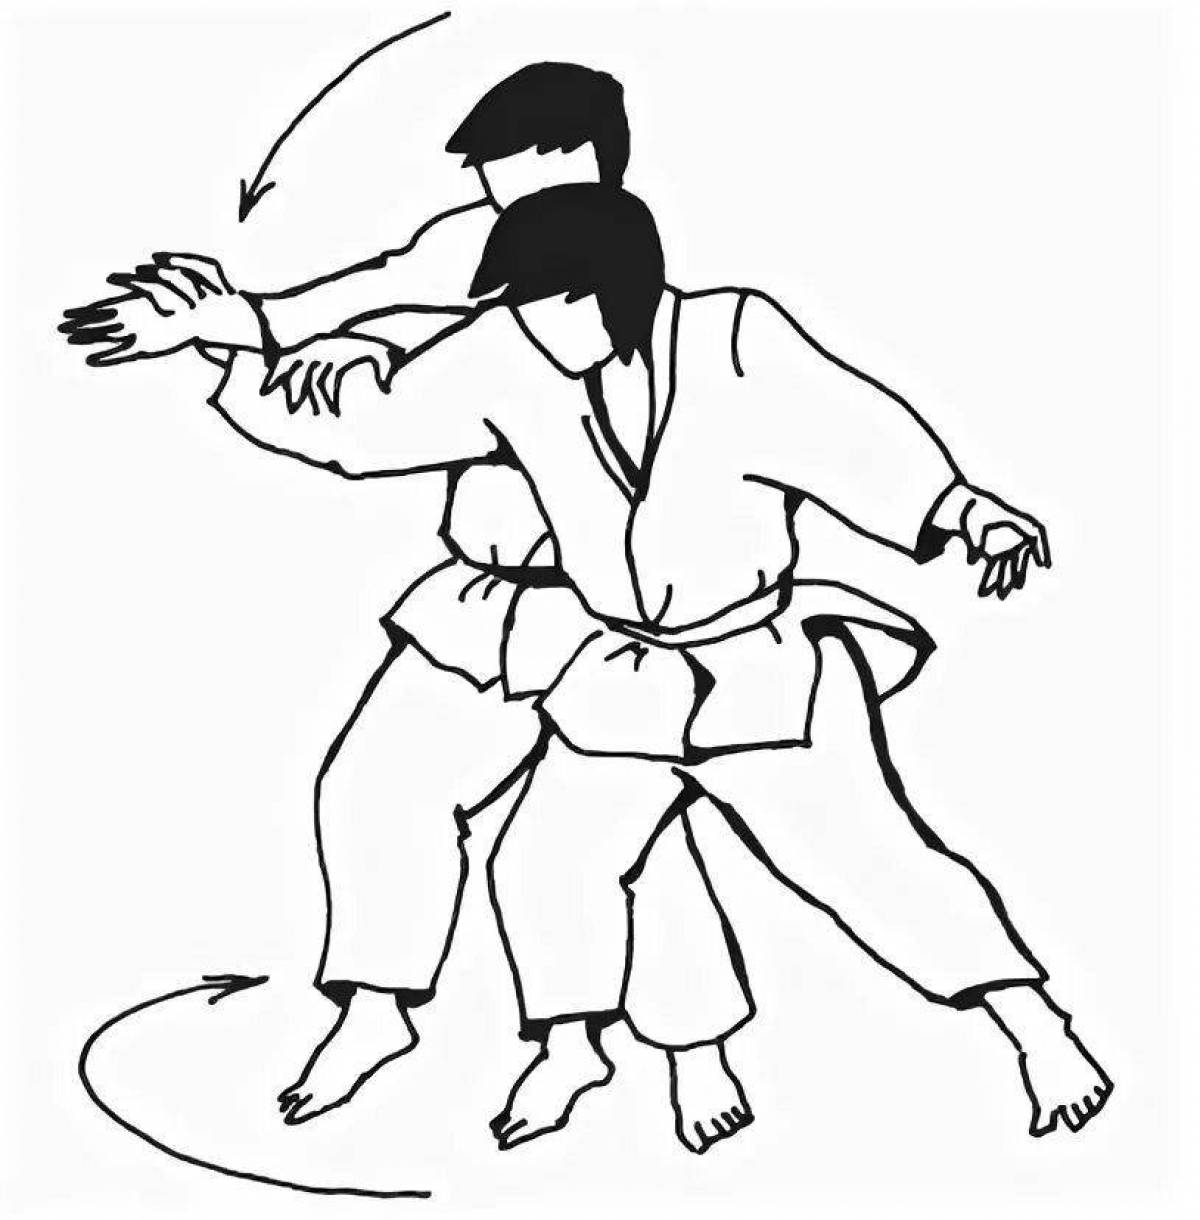 Attractive aikido coloring page